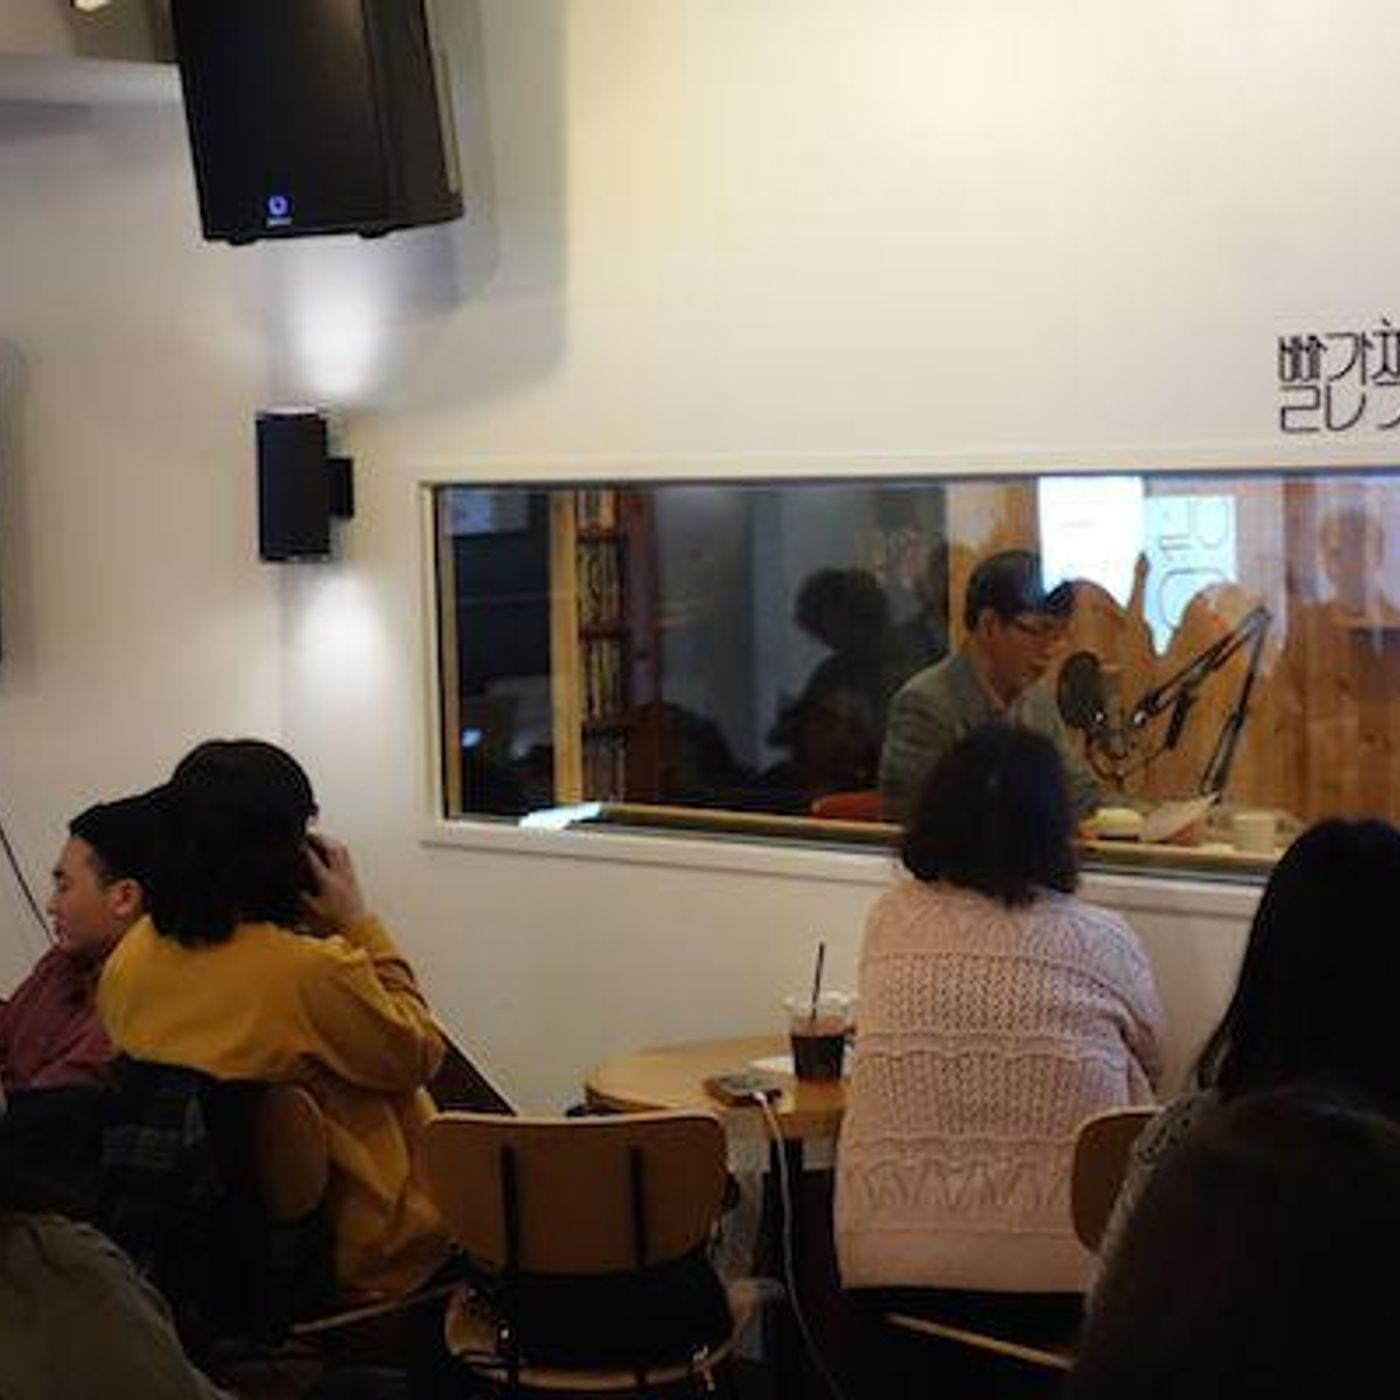 Korea Blog: Seoul's Book Podcast That Draws Standing Room Only Crowds